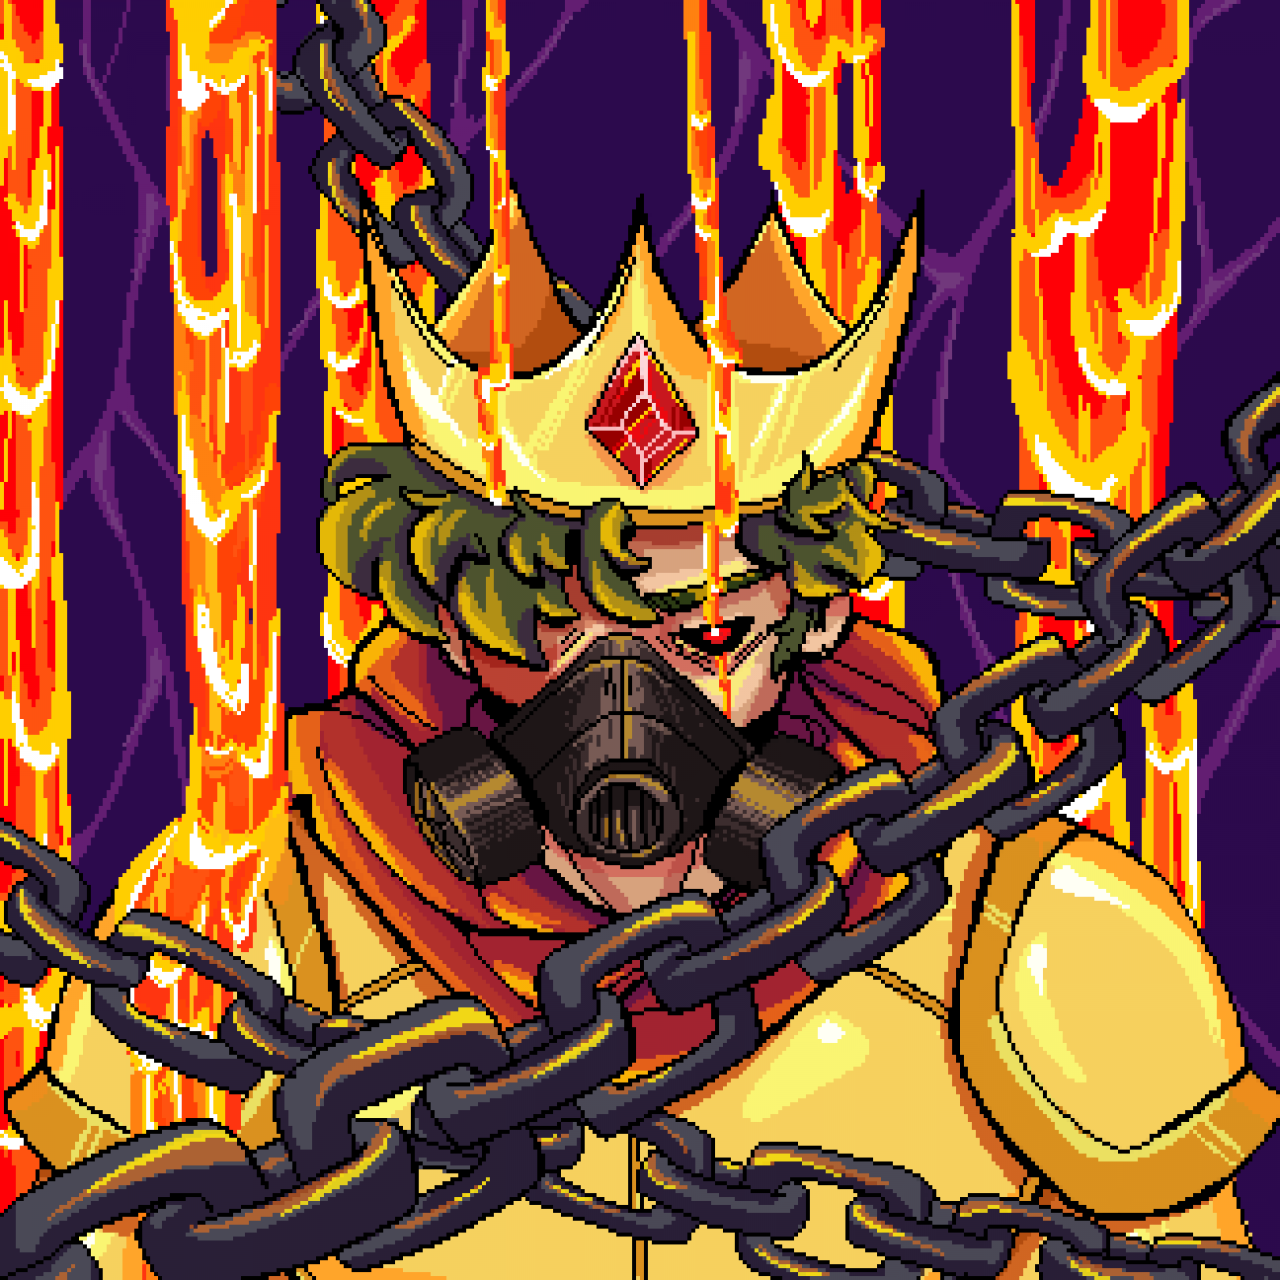 A drawing of Sam as the Warden. He wears a gas mask on his face and golden armor. Behind him, lava drips down onto him. It looks like he's in the prison. Chains crisscross over him, holding him back.